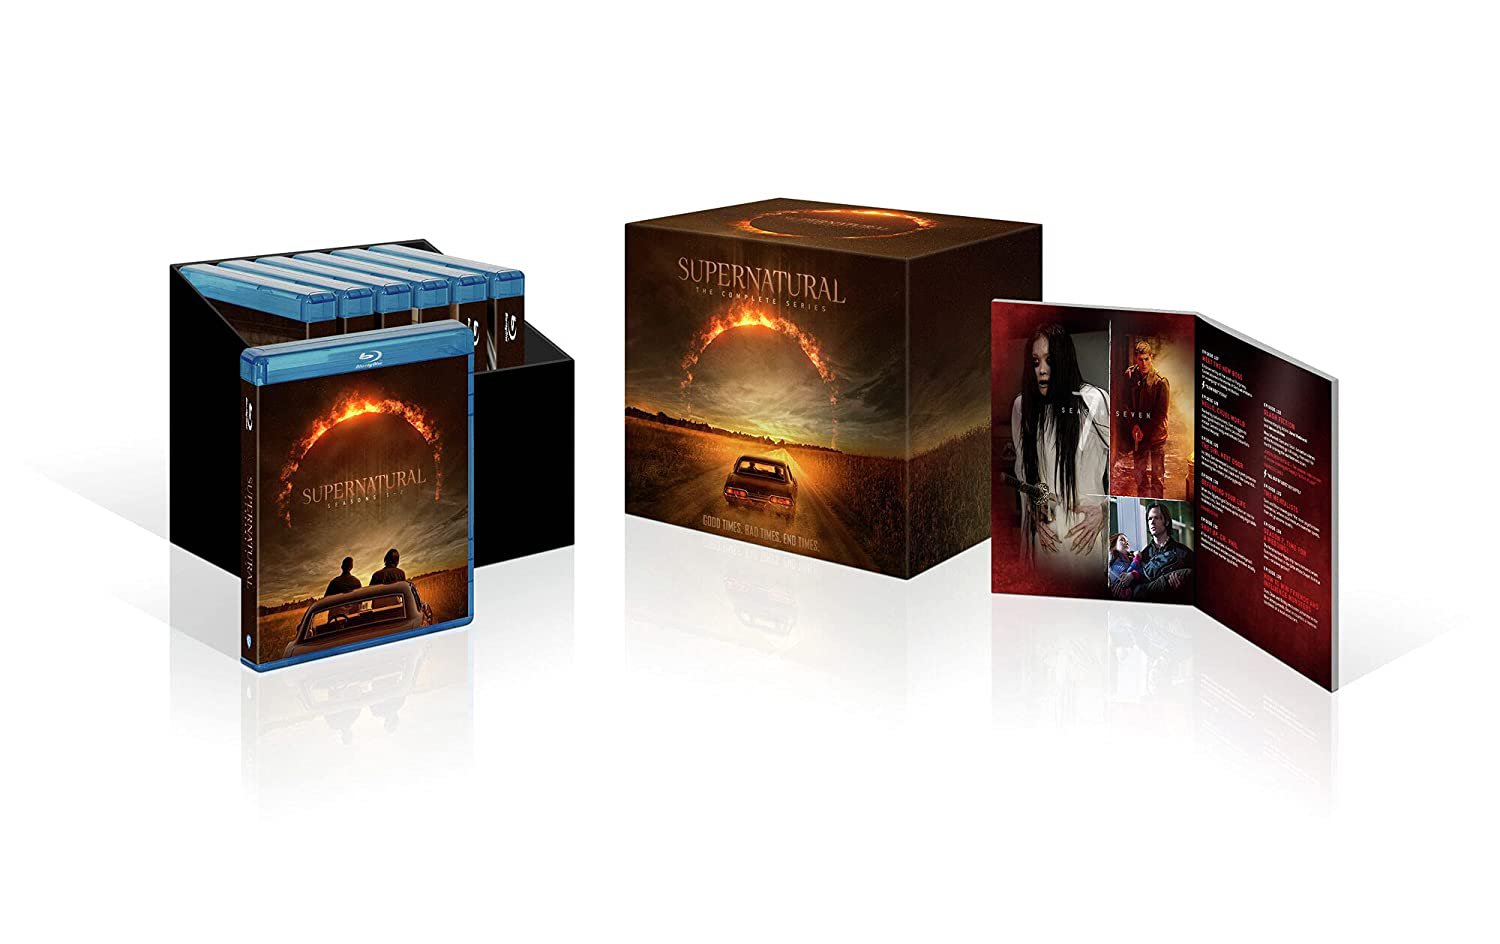 Supernatural: The Complete Series  Blu-ray Boxed Gift Set